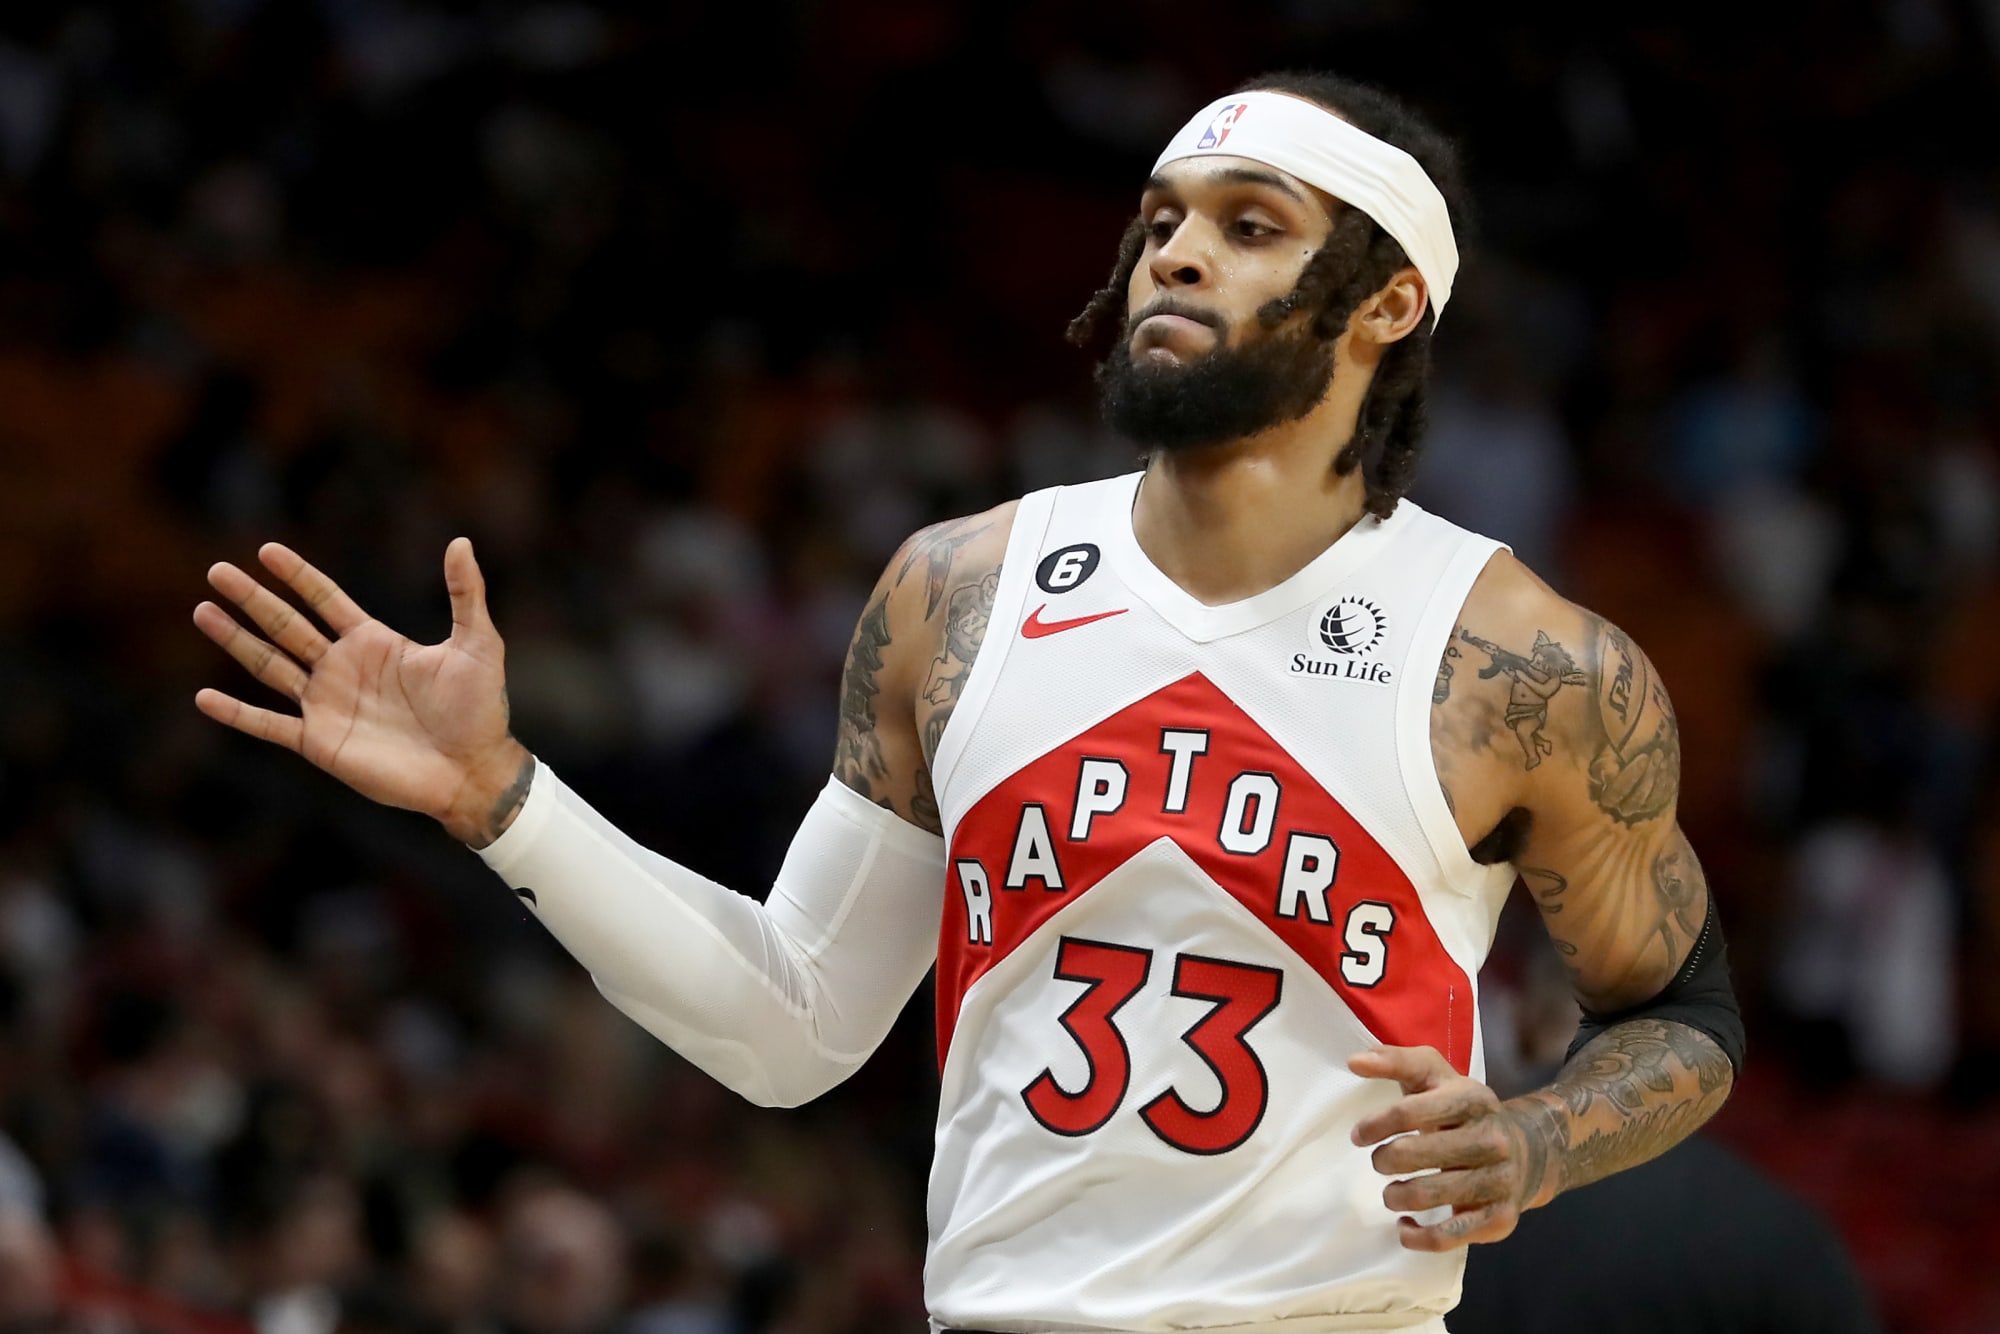 Raptors’ Gary Trent Jr. has a path to first All-Star game nomination